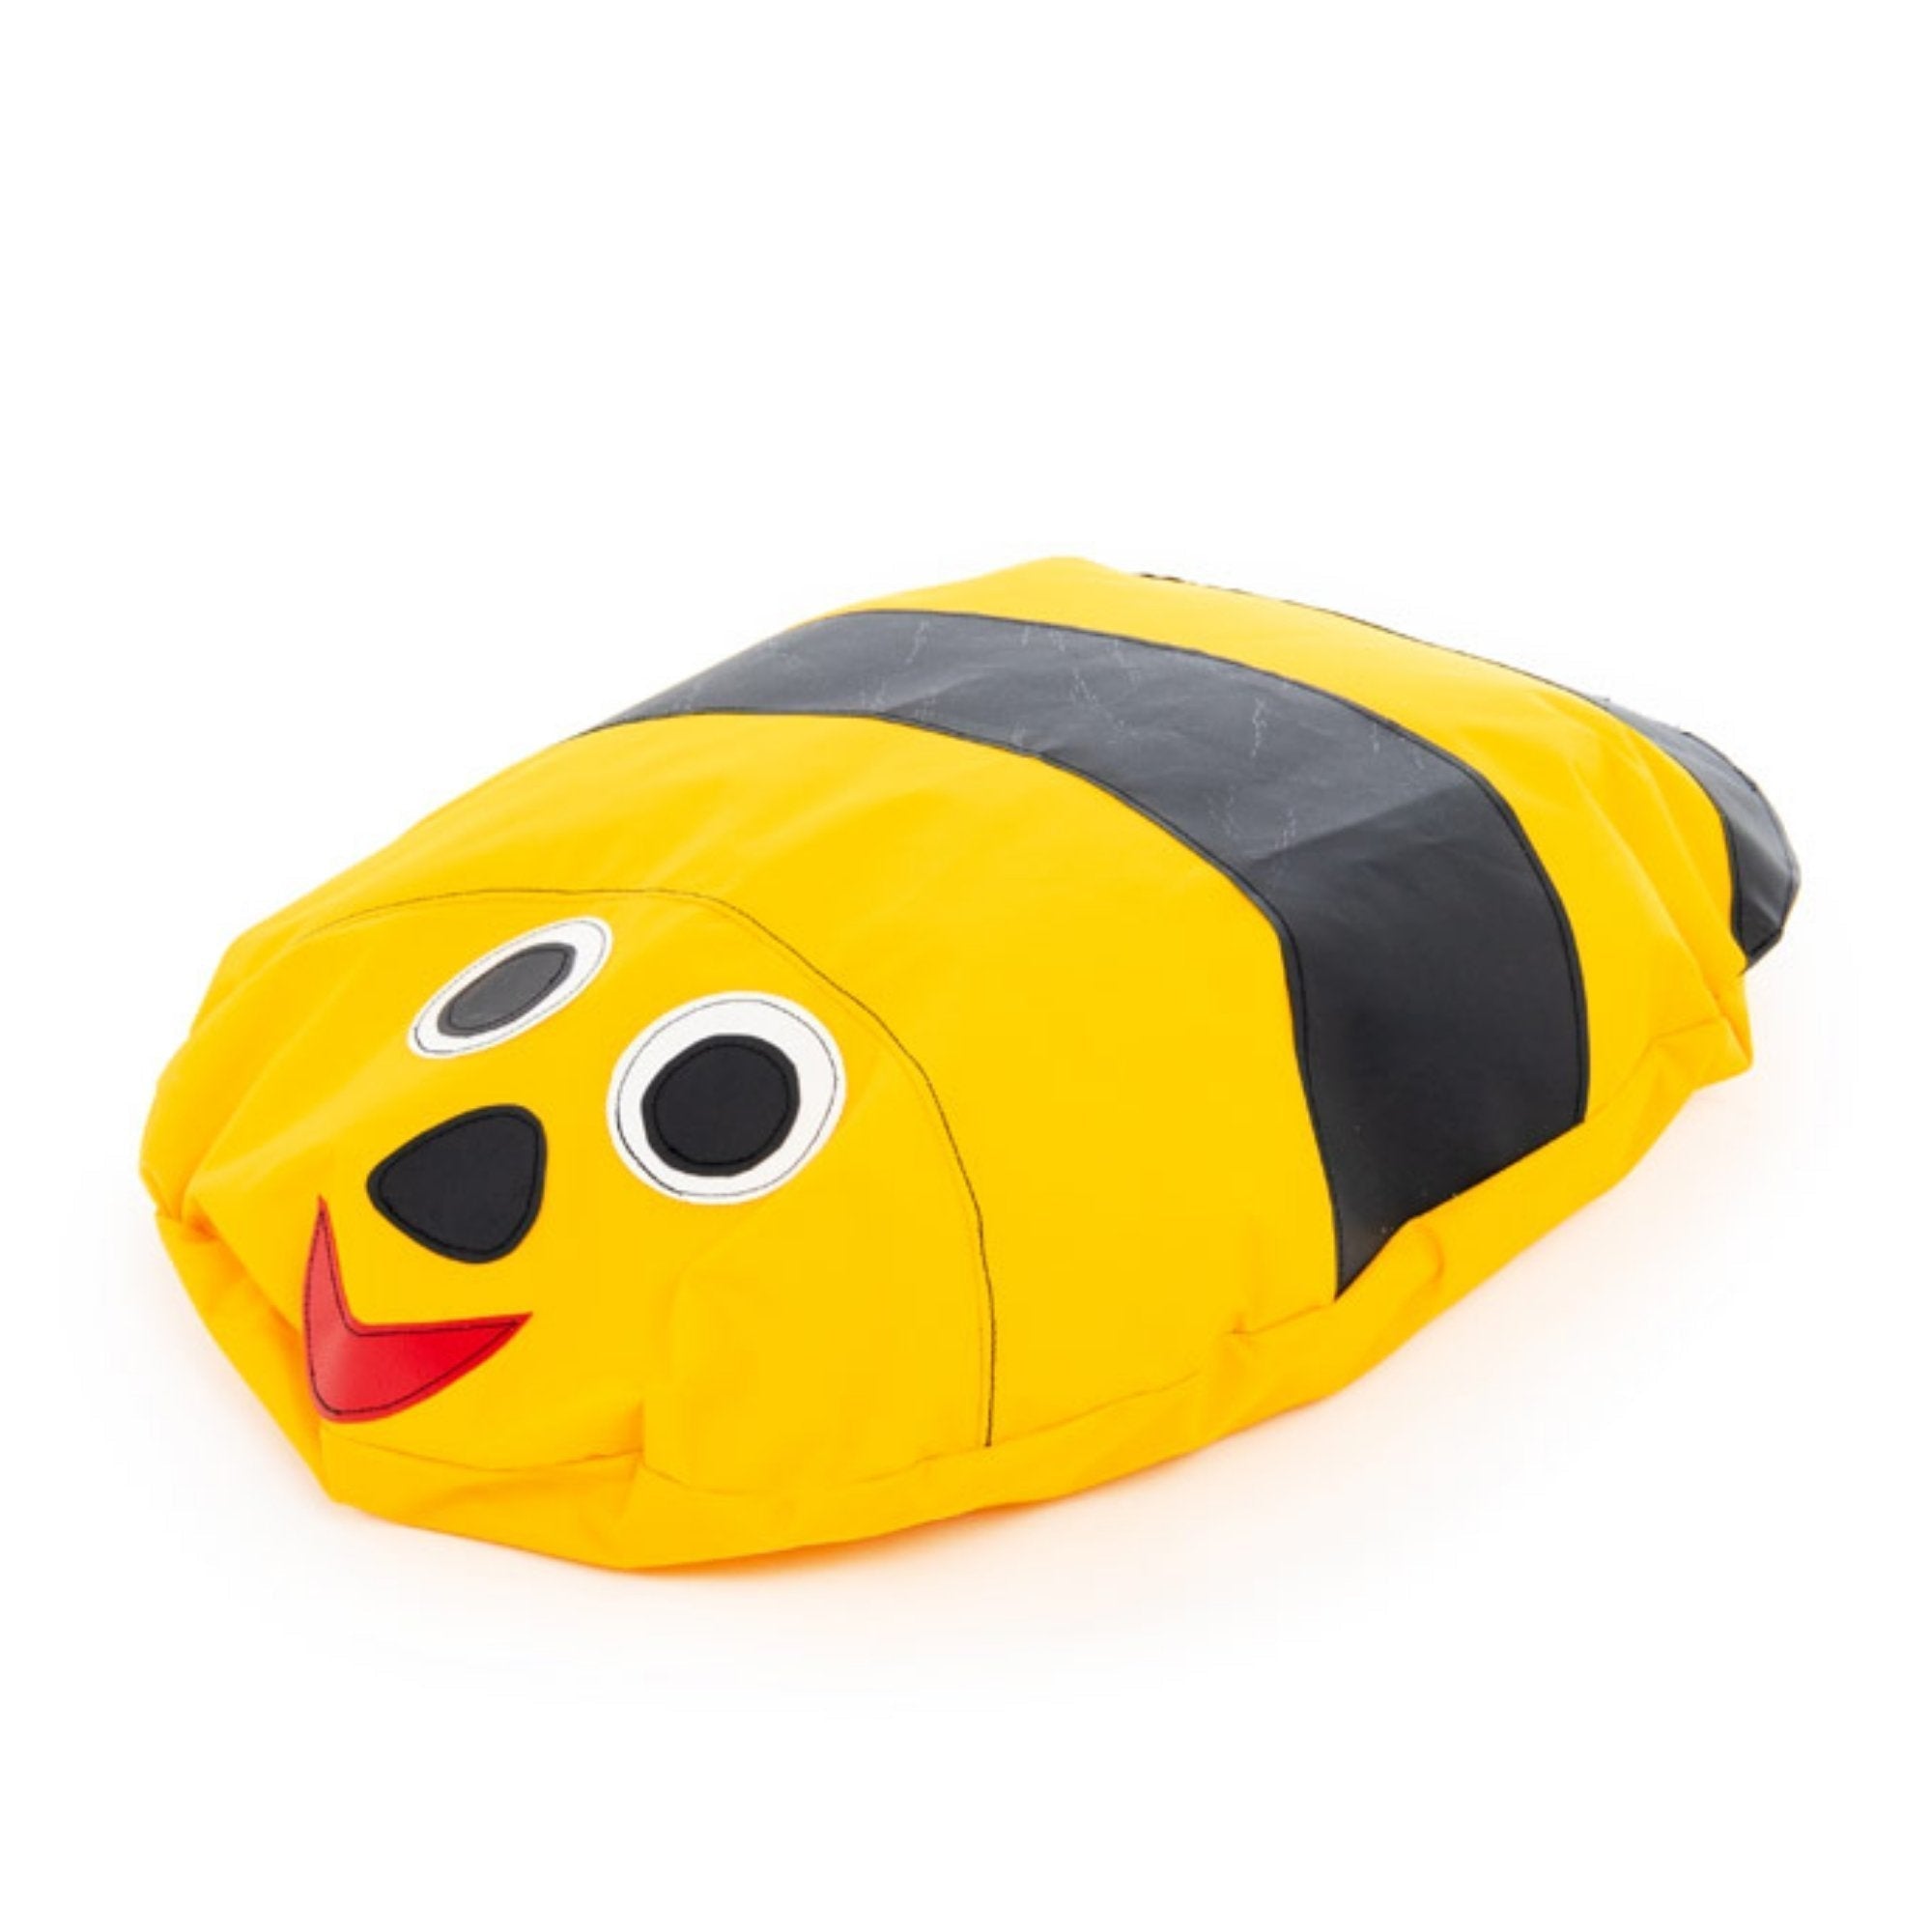 Cosy Friends Bumble Bee Cushion, Create the perfect learning atmosphere in the classroom with the Cosy Friends Bumble Bee Cushion The Cosy Friends Bumble Bee Cushion is a colourful stylish addition to any classroom setting with vibrant colours that will create a delightful focal point. Children will love the vibrant colours these Cosy Friends Bumble Bee Cushion add to your room. These Fun Creature Bean Bags are designed for seating all around the nursery. The loveable designs each represent species from the